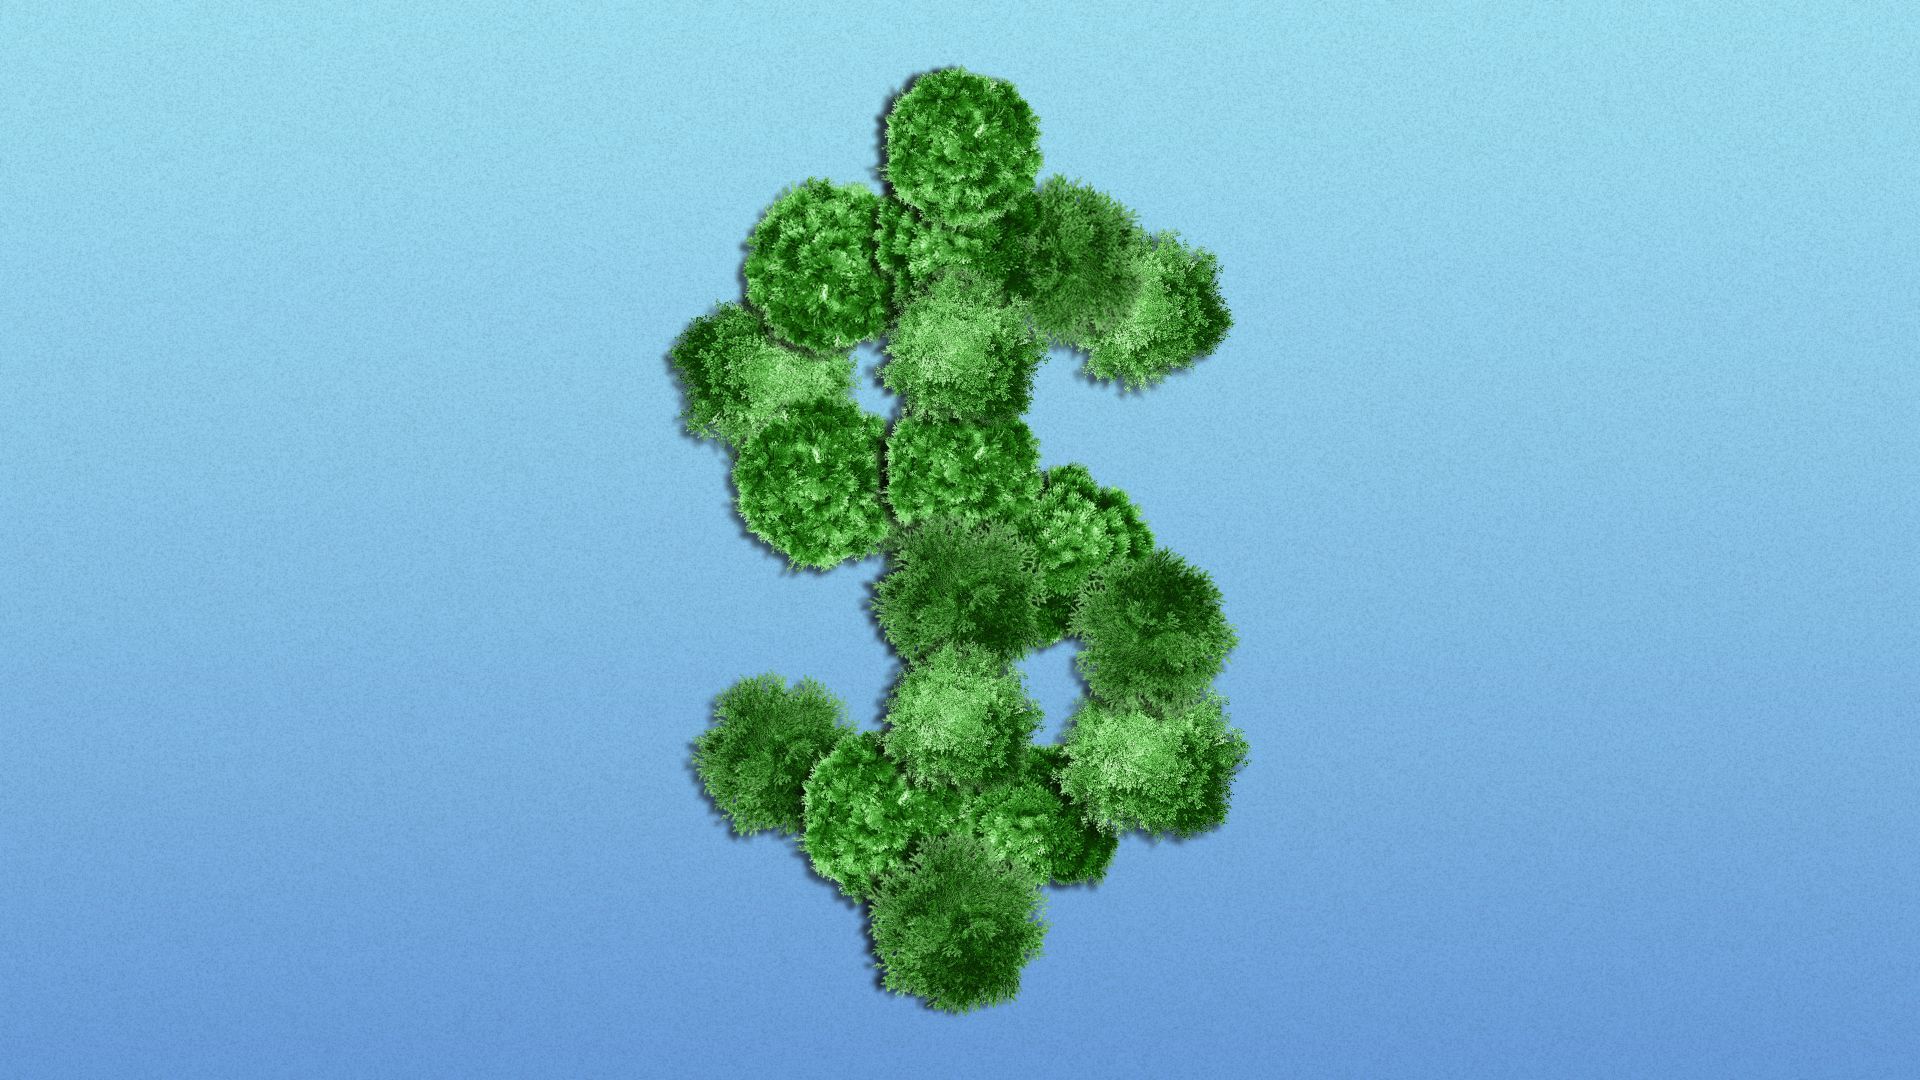 Illustration of an aerial view of treetops in the shape of a dollar sign.